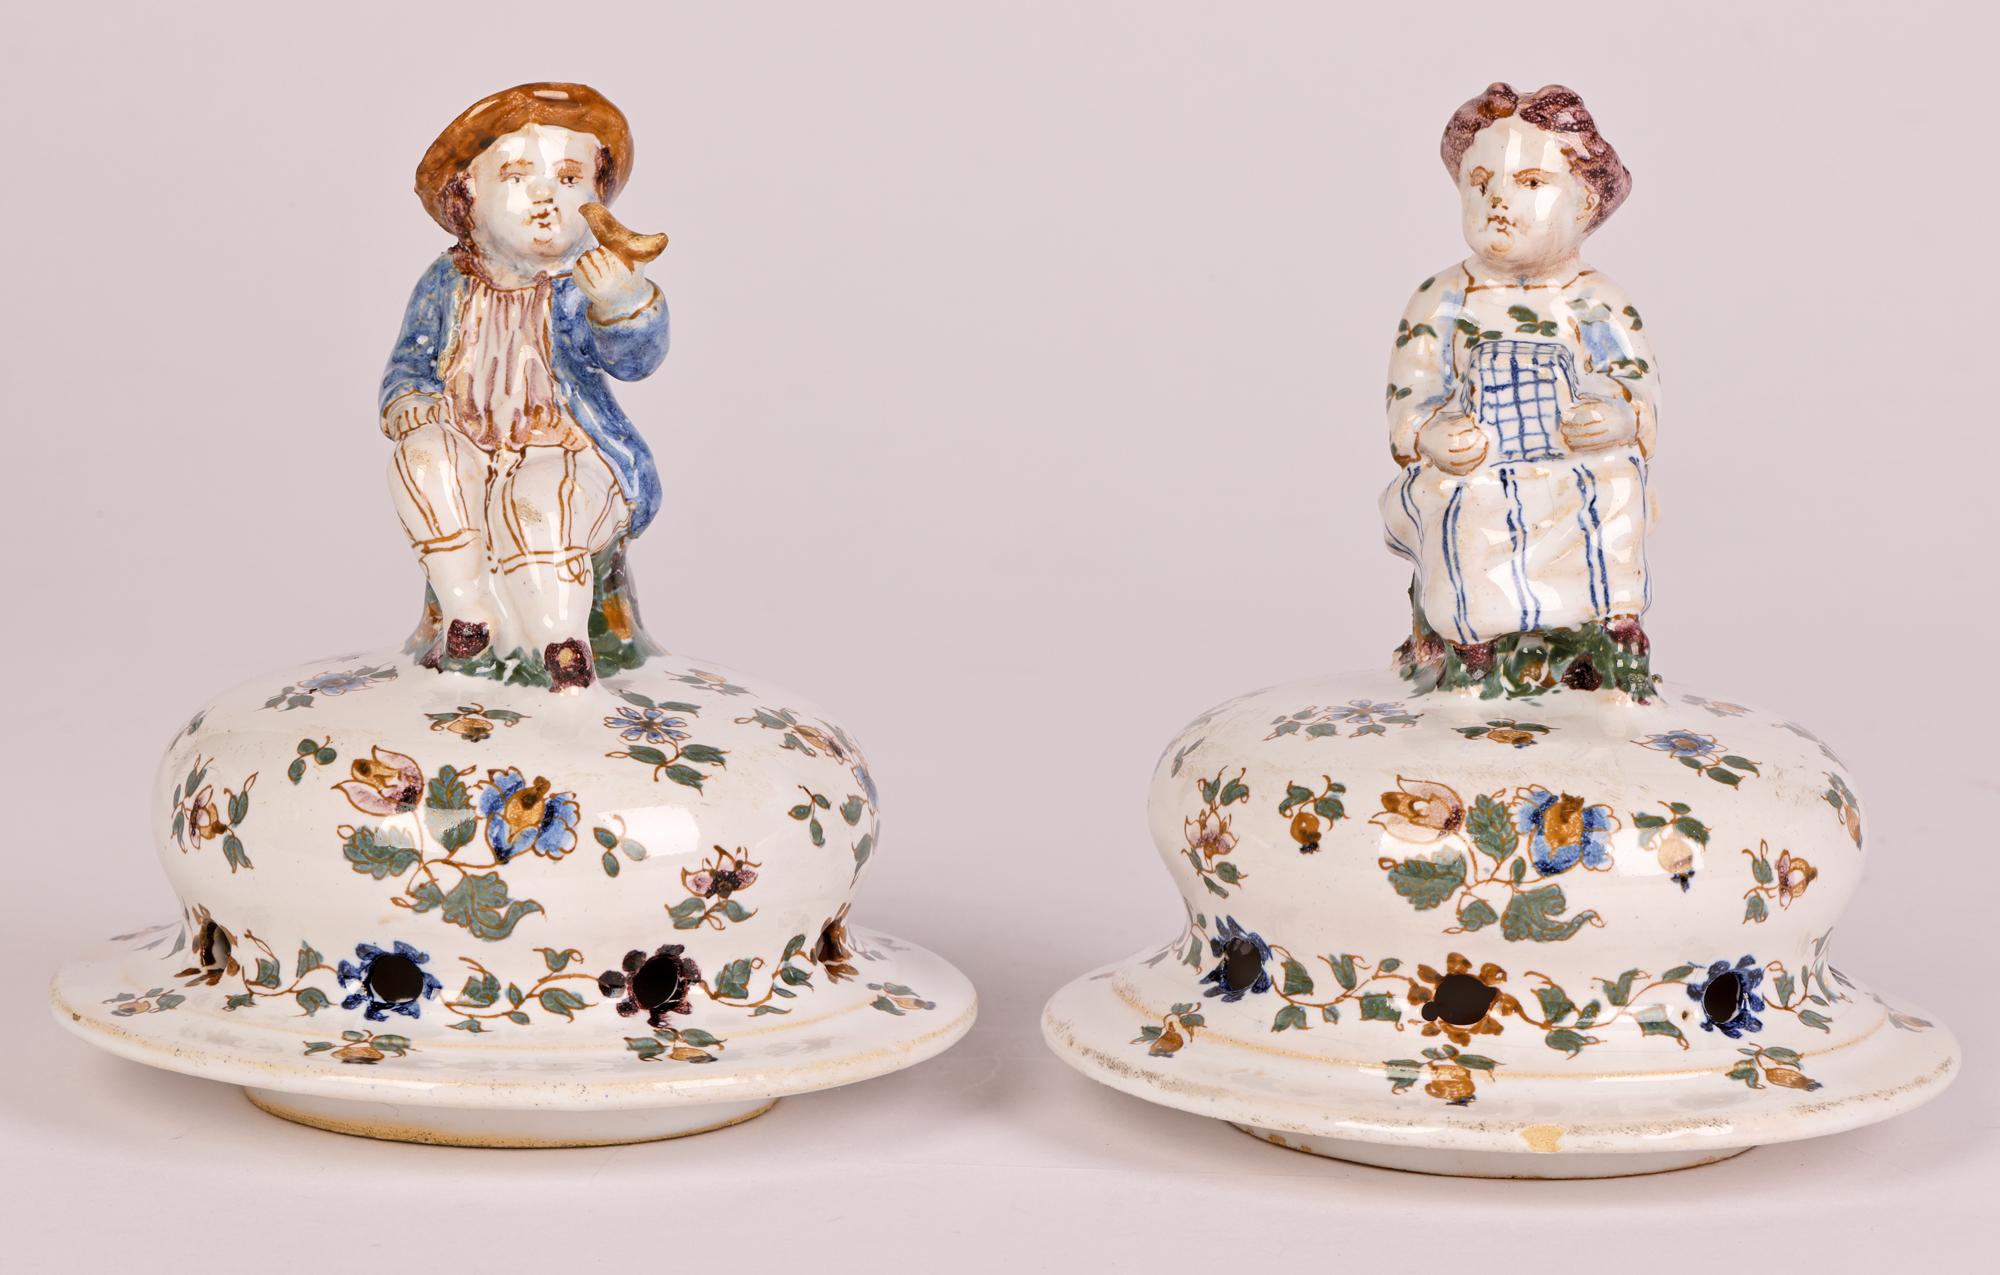 A very fine pair antique French Moustiers faience pot-pourri pottery lidded vases mounted with figures dating from the 19th century. This stunning pair of baluster shaped pedestal vases stand on a domed shape foot with narrow stem and shaped body